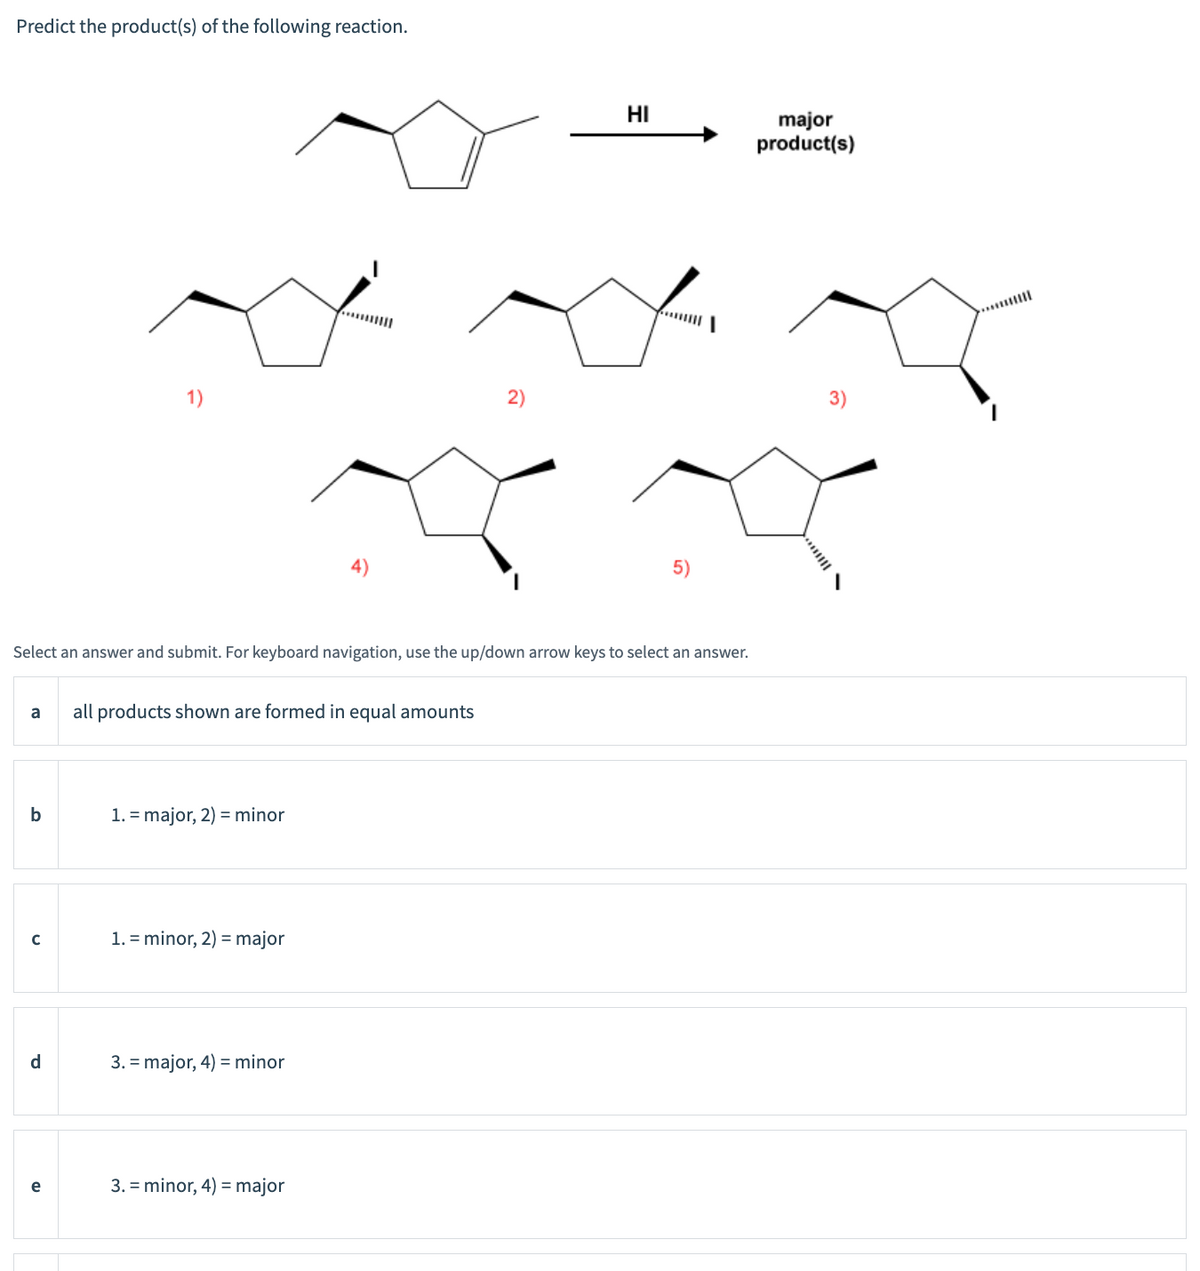 Predict the product(s) of the following reaction.
4)
2)
HI
major
product(s)
Select an answer and submit. For keyboard navigation, use the up/down arrow keys to select an answer.
a
all products shown are formed in equal amounts
b
1. major, 2) minor
с
1. minor, 2) major
d
3. major, 4) minor
e
3. minor, 4) major